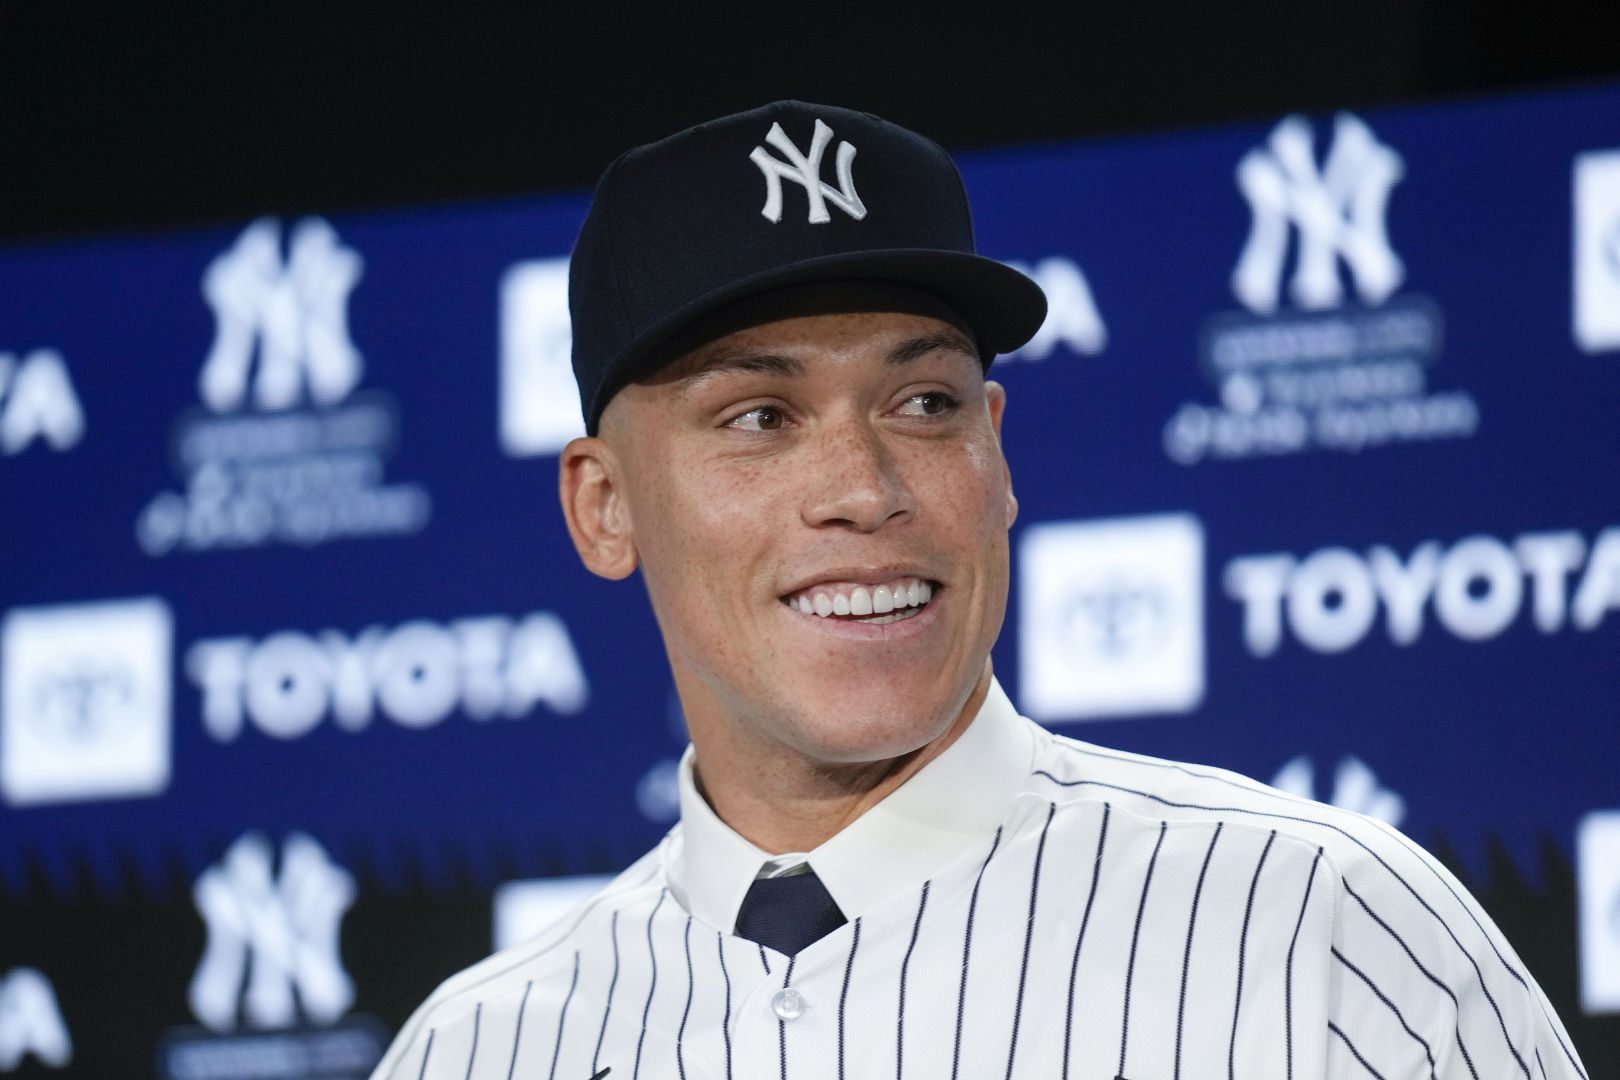 Aaron Judge: Aaron Judge follows $189,000,000 legacy set by Derek Jeter,  becomes second Yankees captain to sign with Jordan Brand